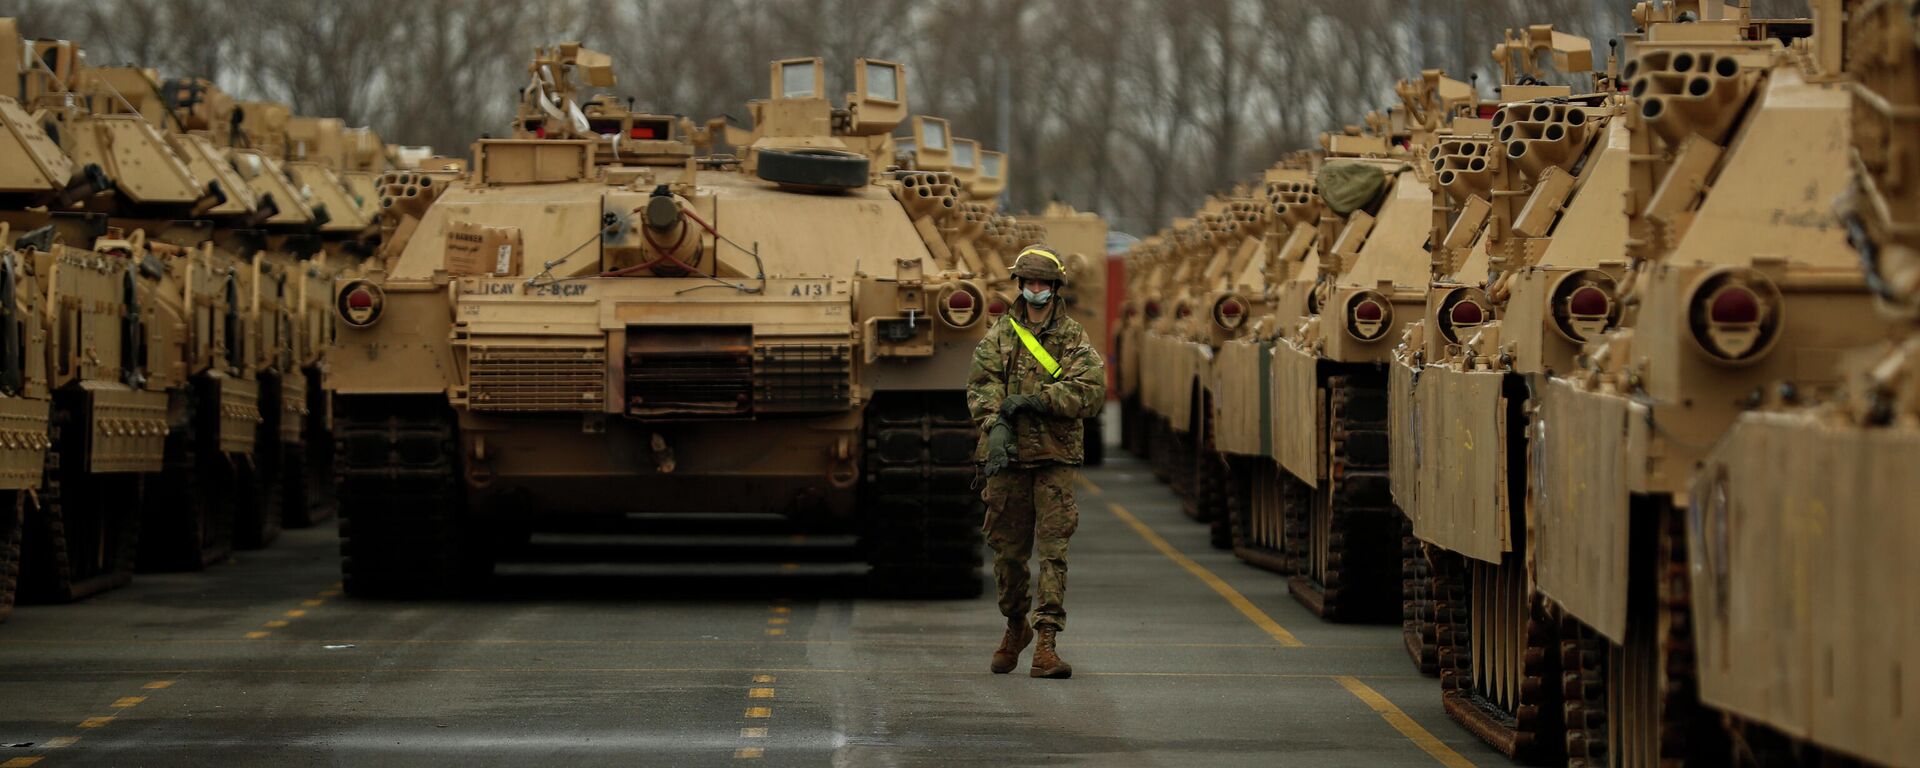 A U.S. soldier walks past parked armoured vehicles and tanks of the 1st Armored Brigade Combat Team and 1st Calvary Division, based out of Fort Hood, Texas, as they are unloaded at the port of Antwerp, Belgium, Monday, Nov. 16, 2020. The U.S. military vehicles are on their way to Eastern Europe to take part in the Atlantic Resolve military exercises, in which American troops train together with NATO partners to help ensure stability in Europe. - Sputnik International, 1920, 26.01.2022